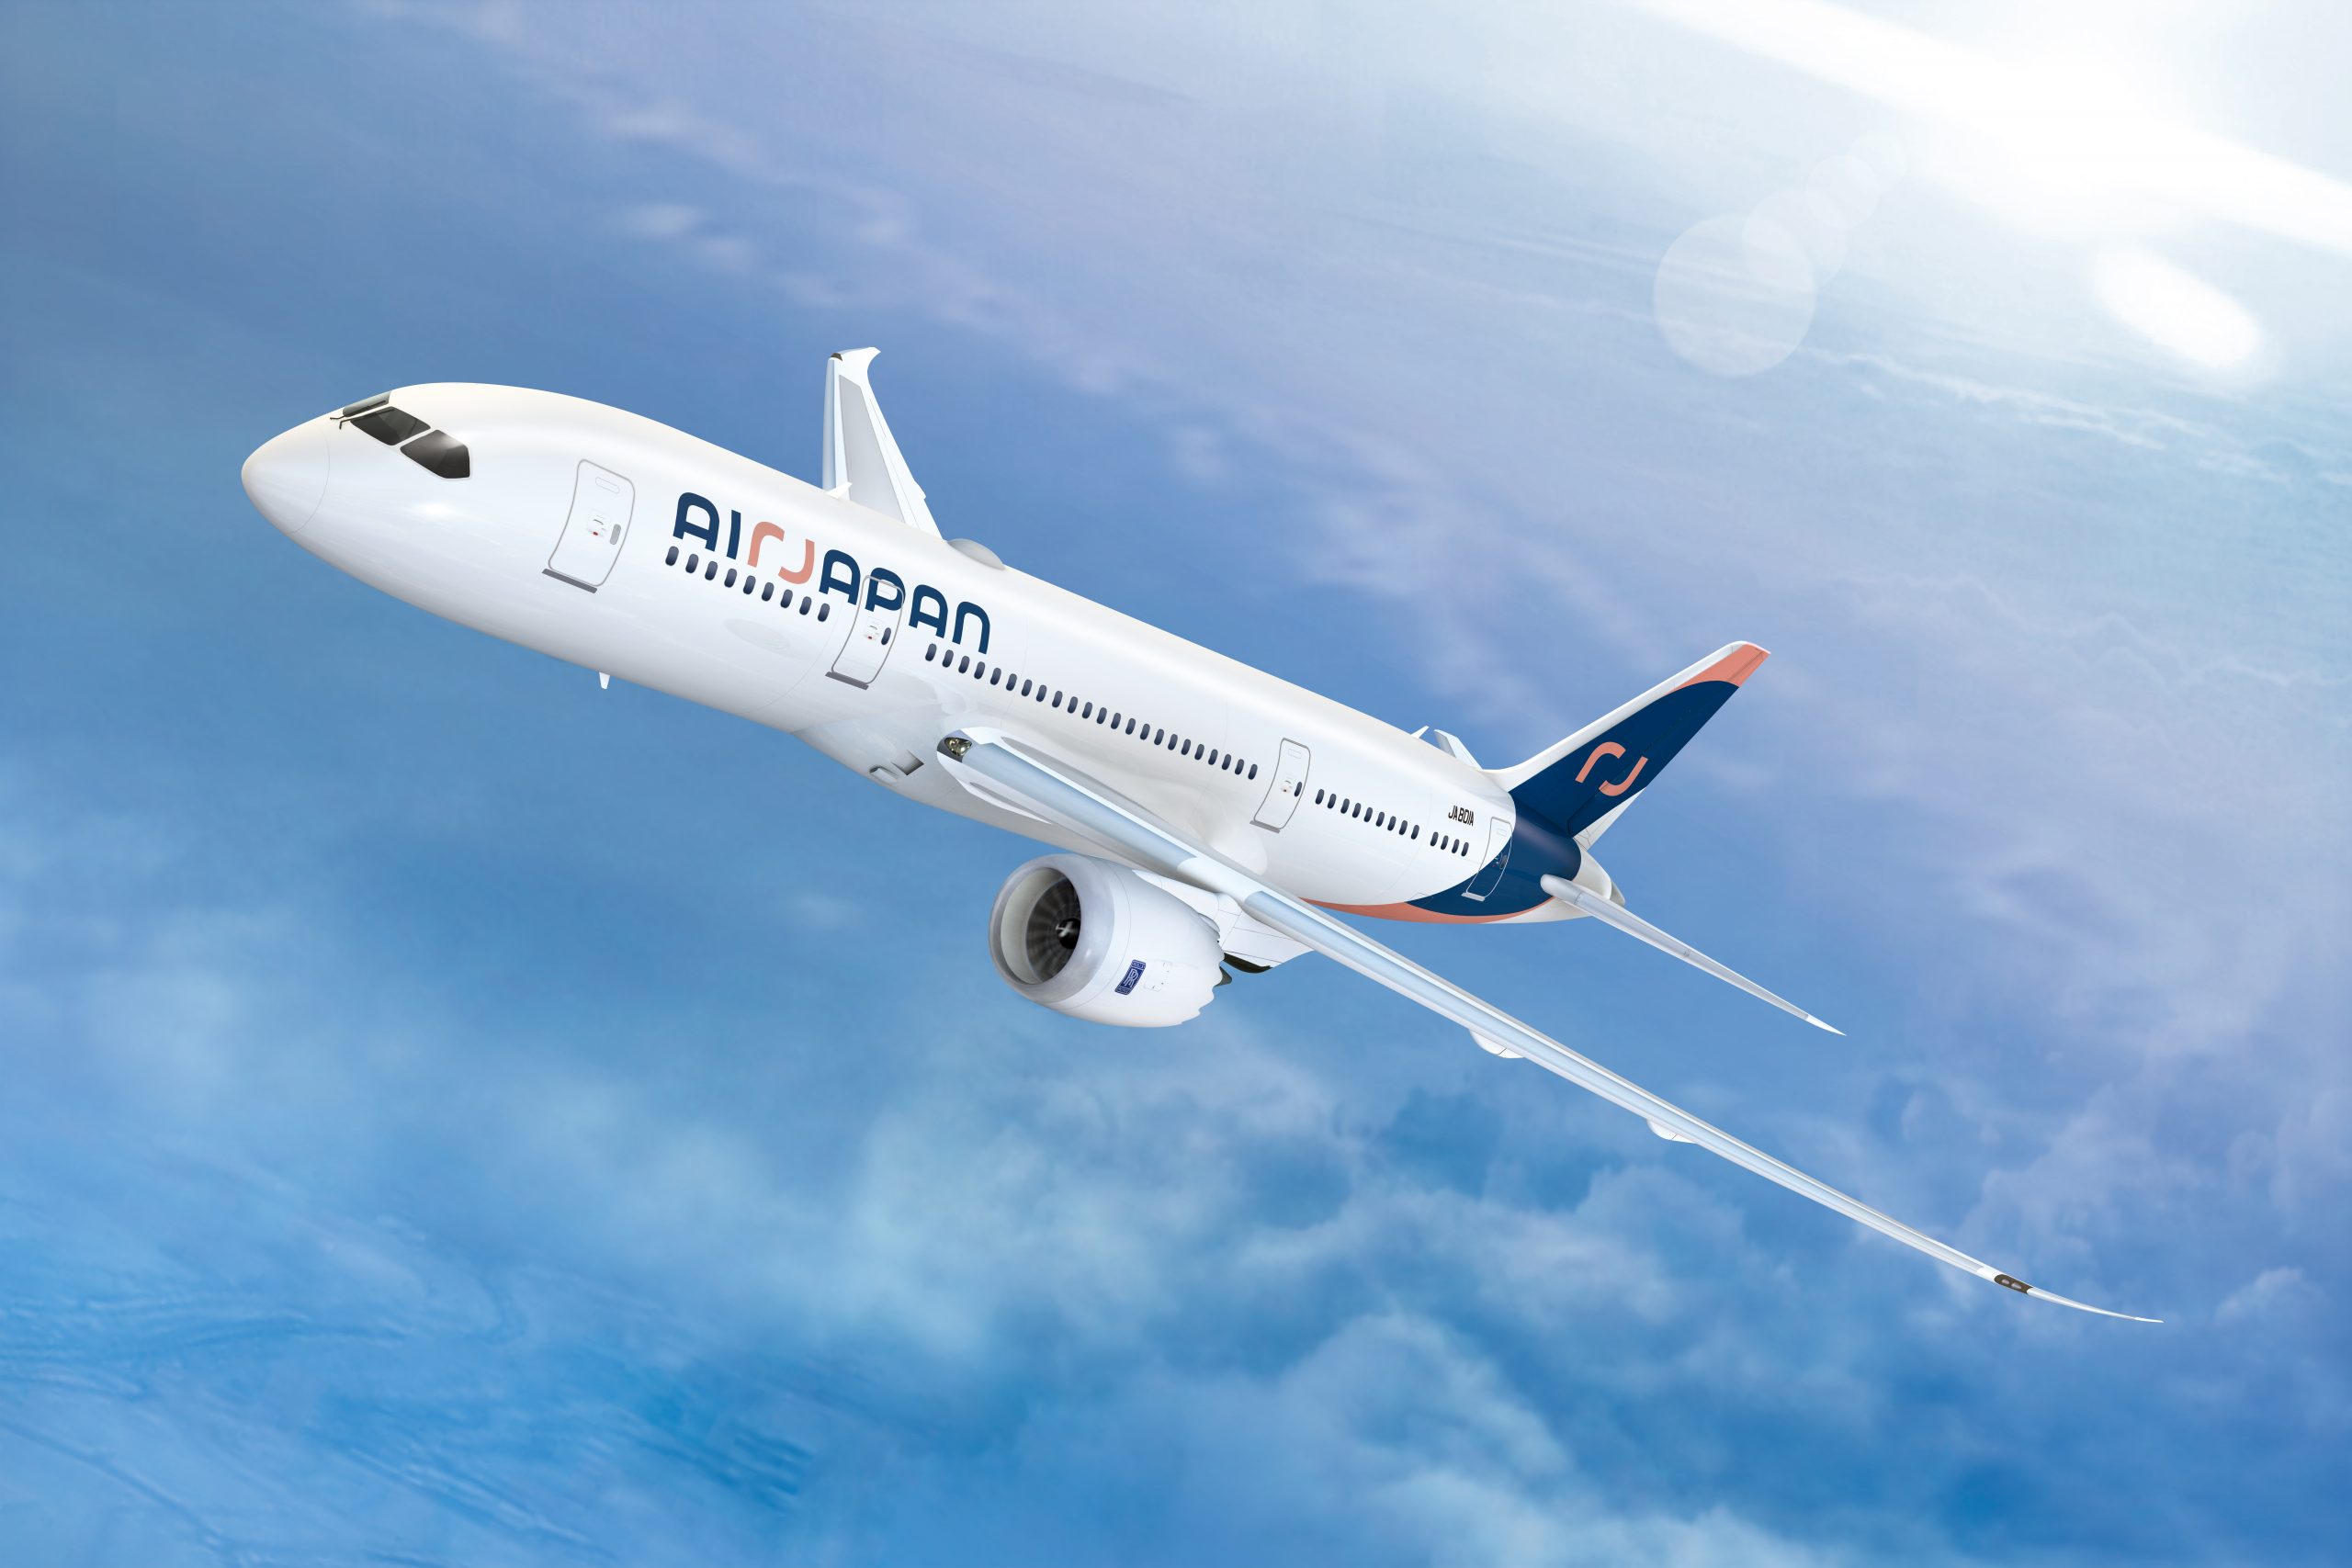 Image of an AirJapan branded aircraft flying in the air